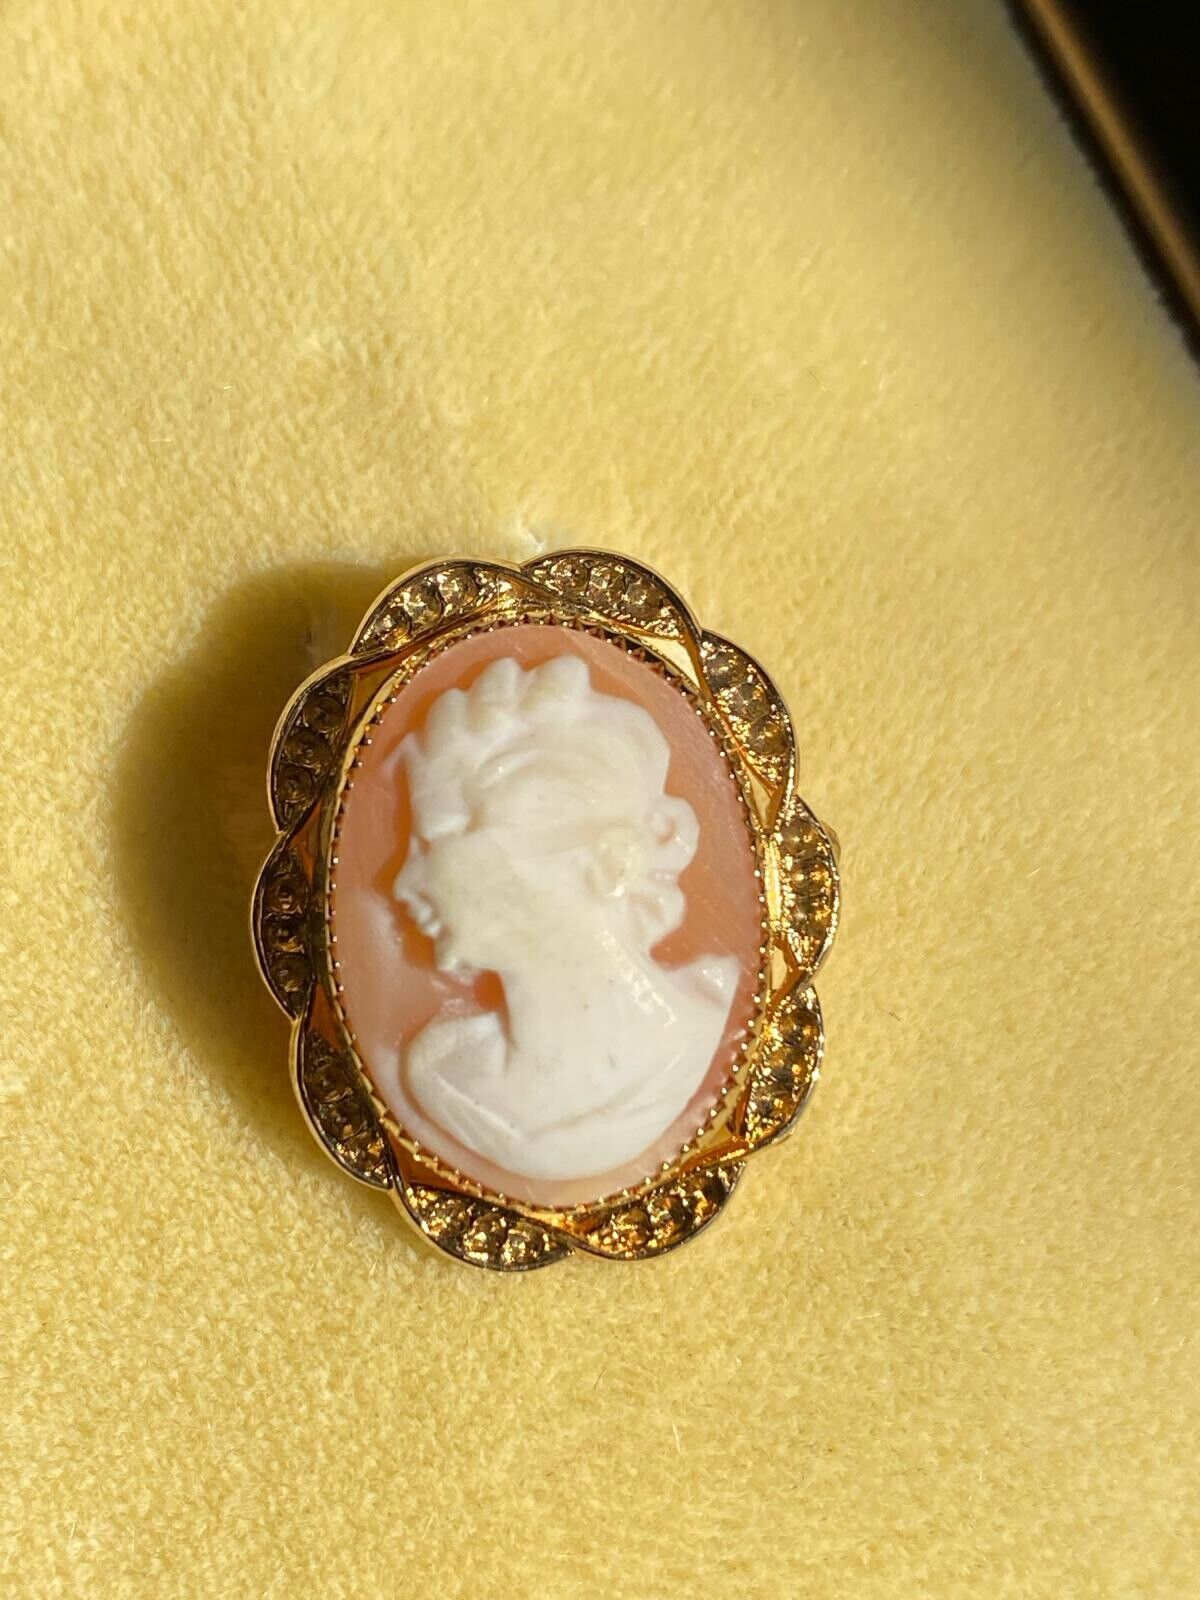 VINTAGE CATAMORE 1/20 12K GF CARVED SHELL CAMEO BROOCH PIN Gold Filled NEW! CATAMORE - фотография #2